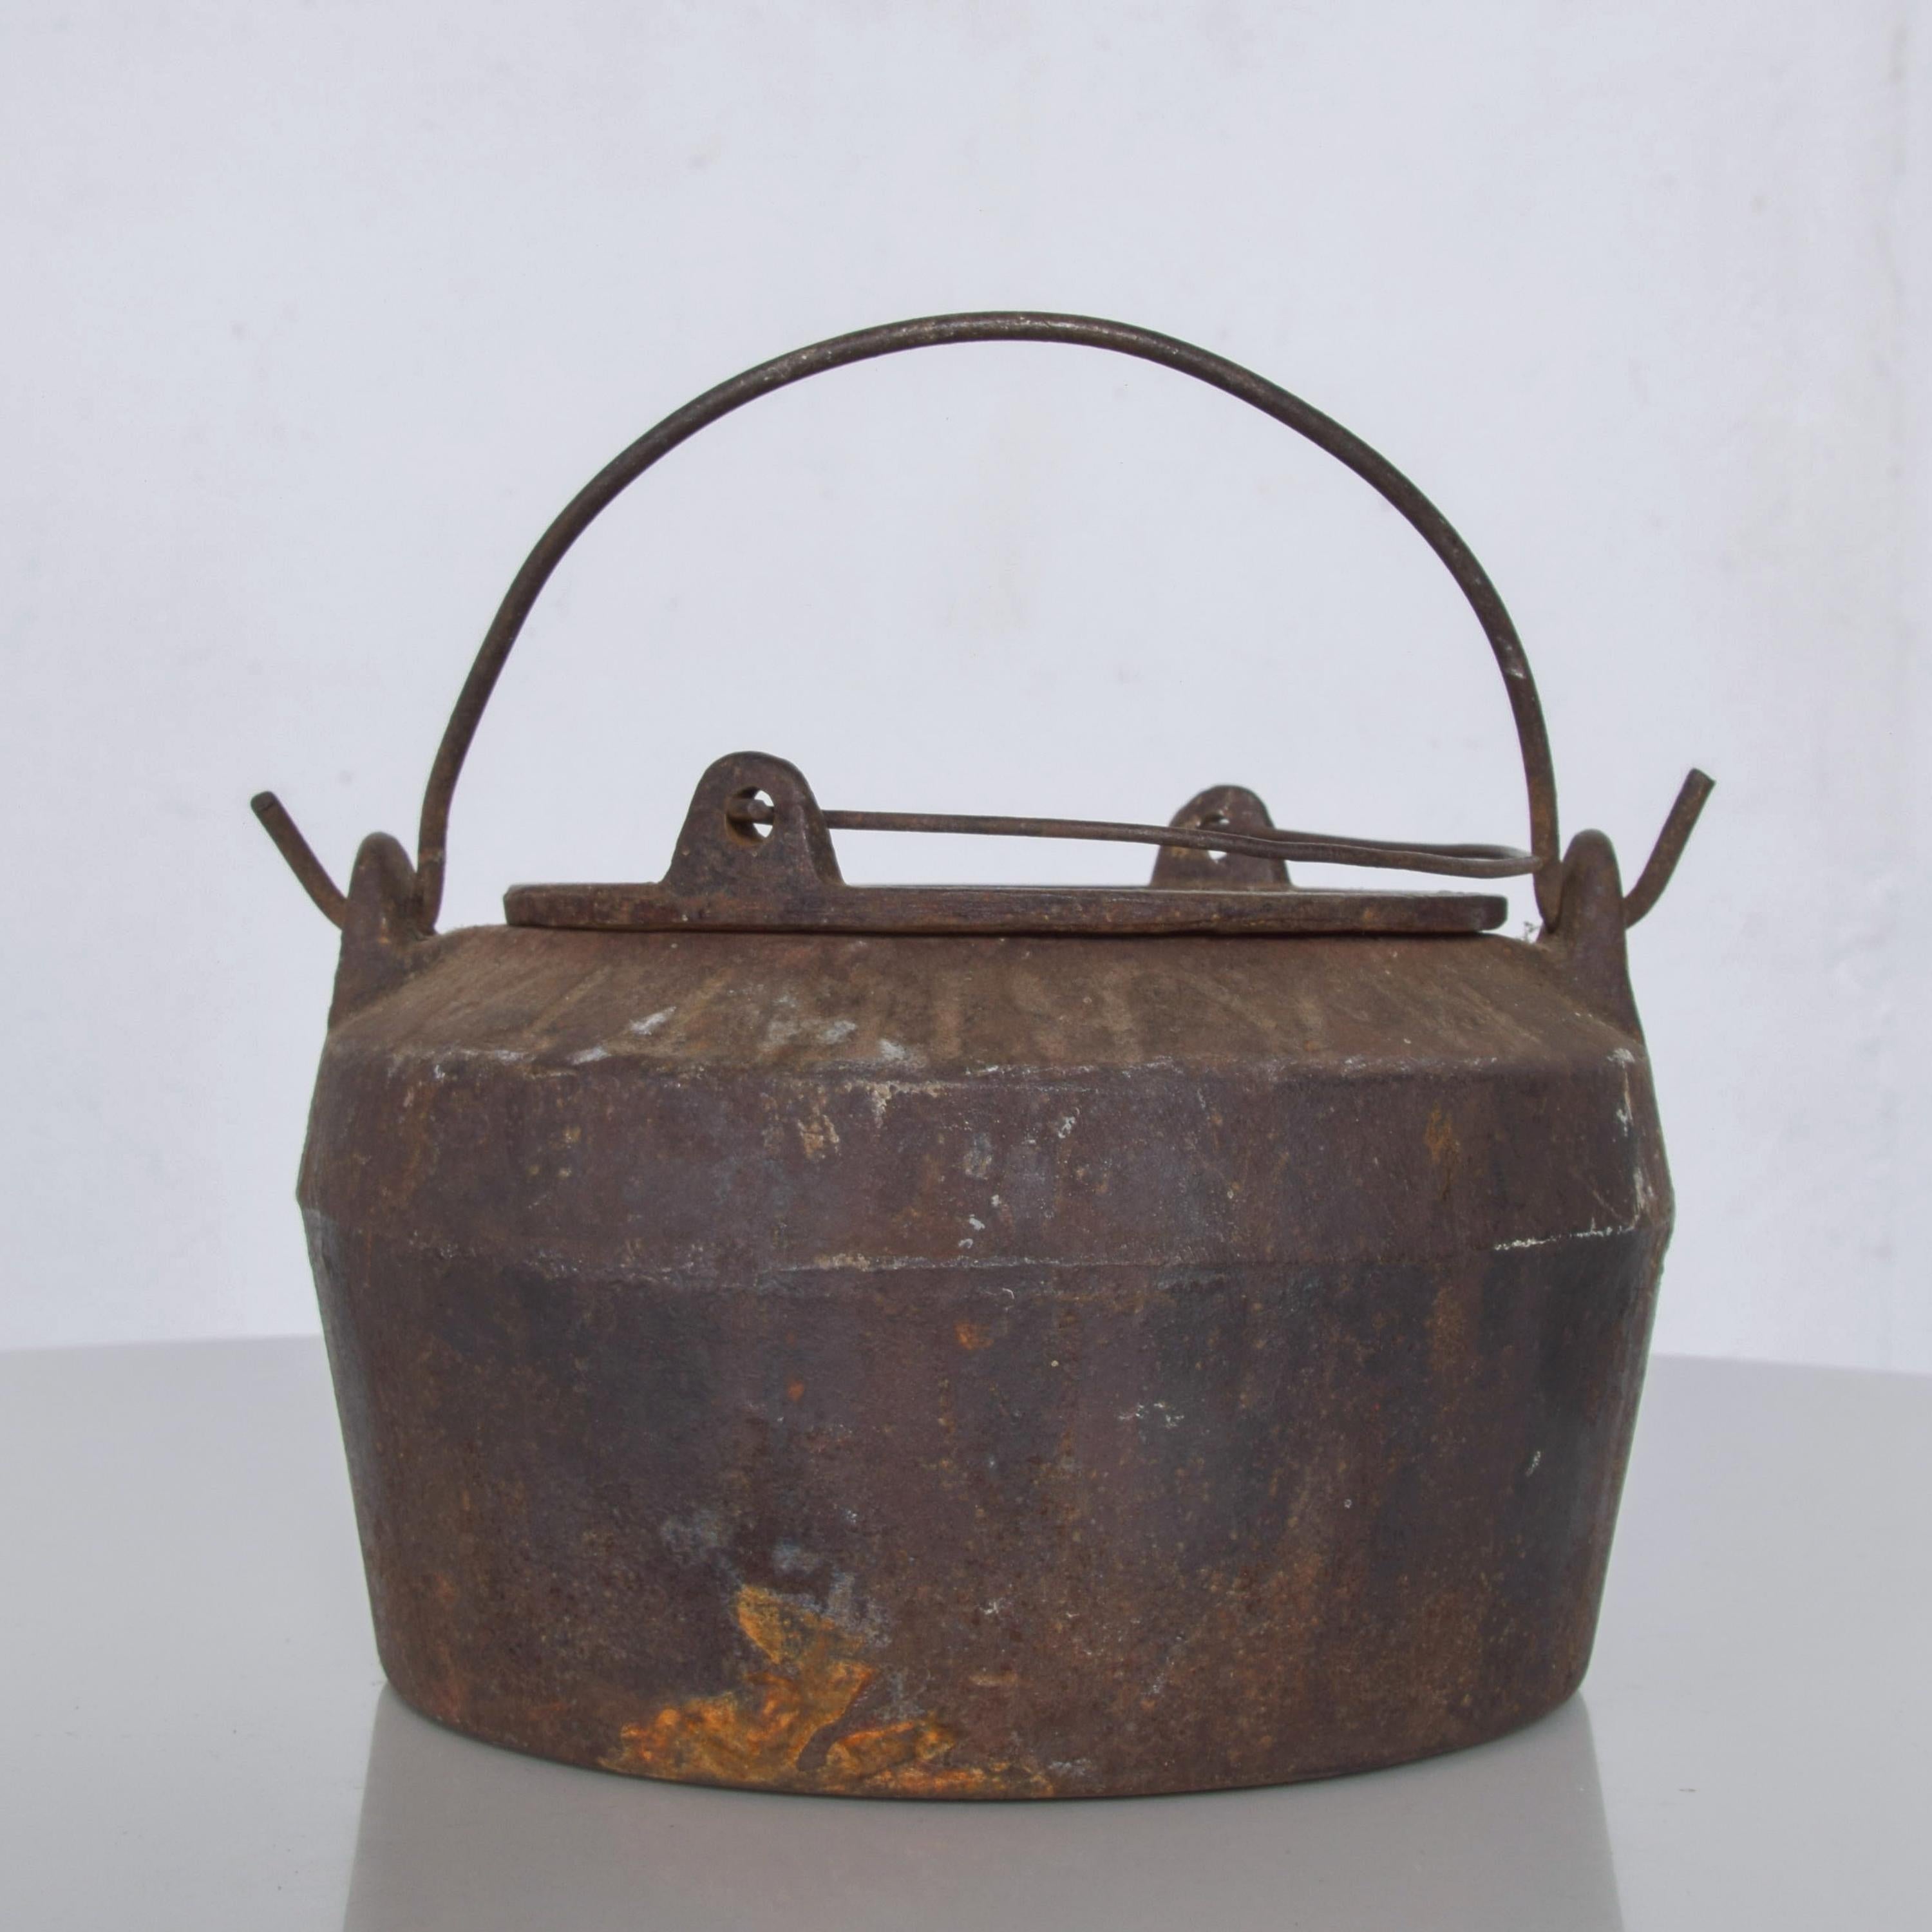 Foundry Smelting Pots Antique Industrial Patinated Rustic Condition with Metal Hand Carry (2 pot set)
Vintage Cauldron. Wonderful industrial decor.
Measures: 5.5